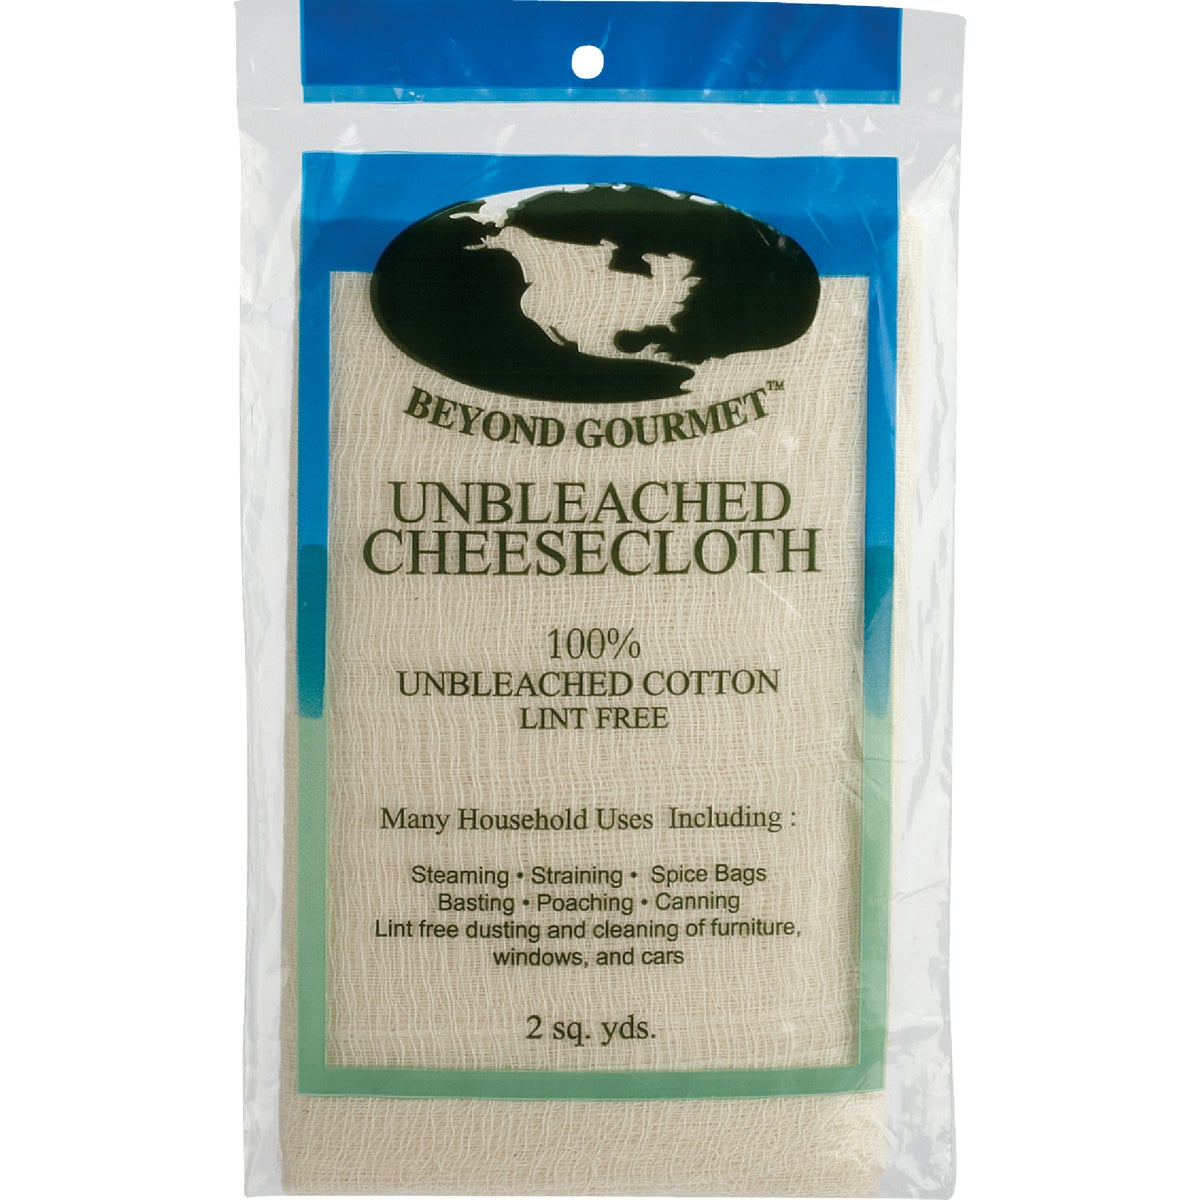 Item 622810, Unbleached cheesecloth made of 100% lint-free cotton.